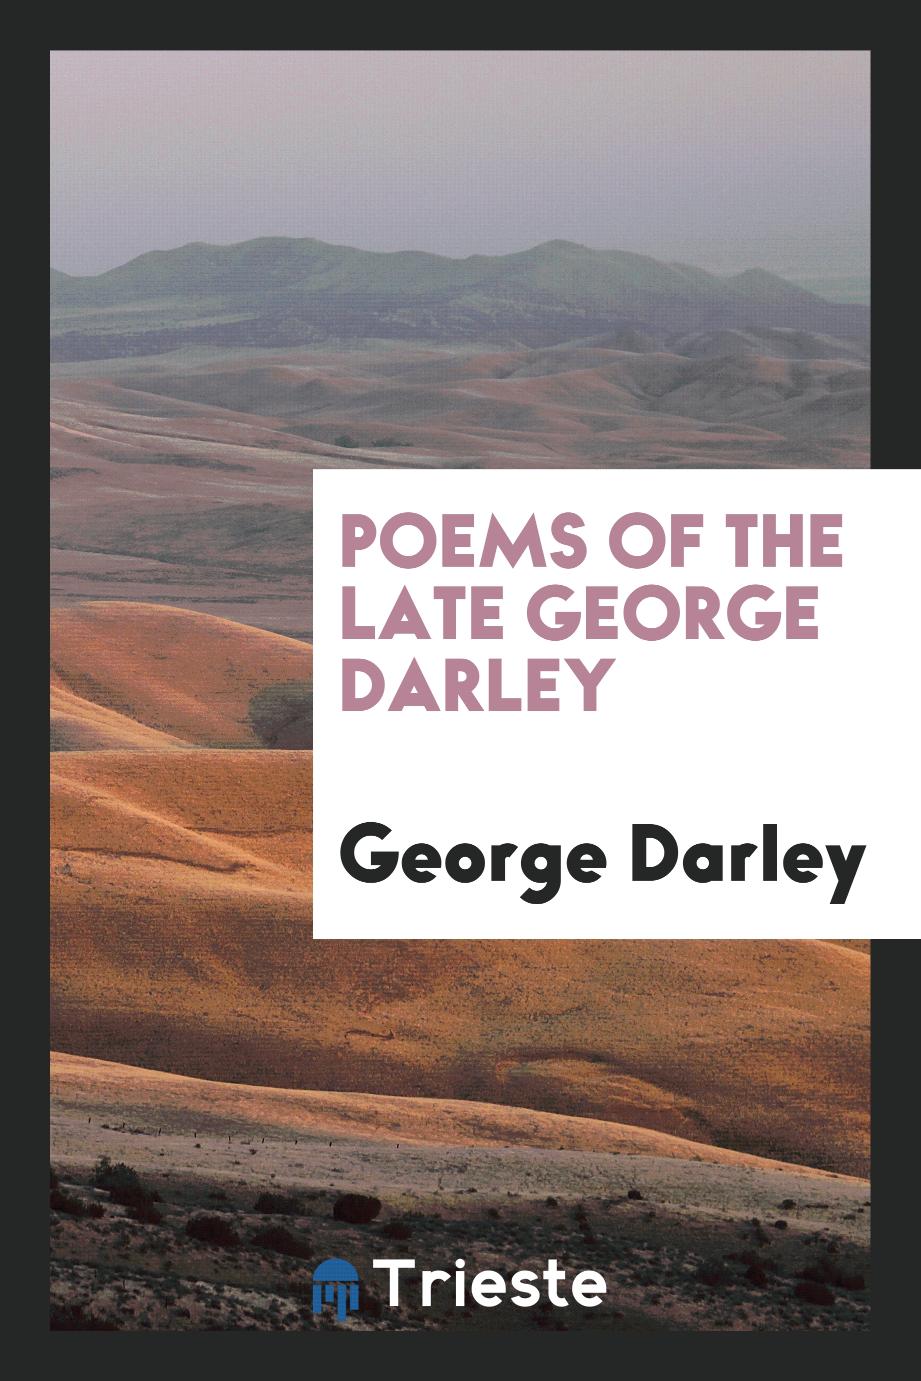 Poems of the late George Darley